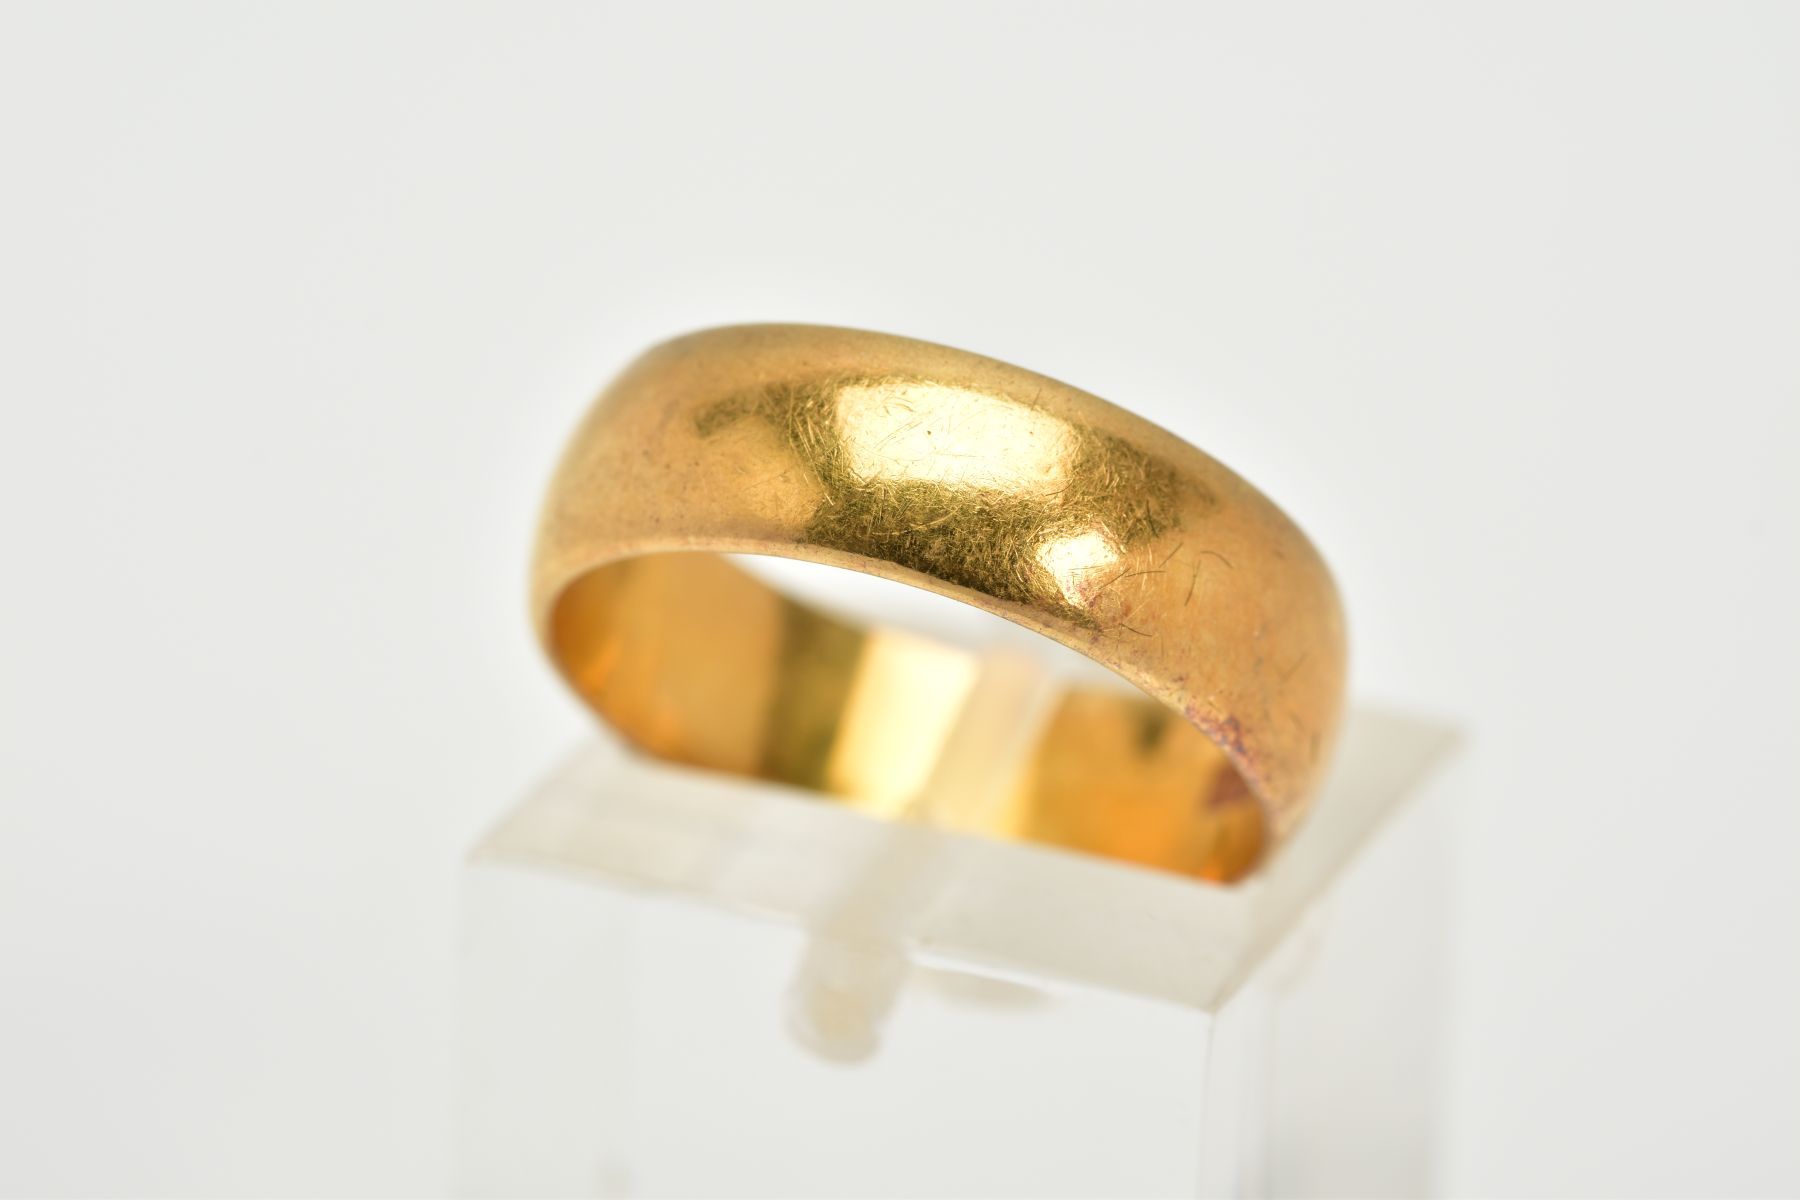 A 22CT GOLD WIDE WEDDING BAND, plain polished design, hallmarked 22ct gold Birmingham, ring size